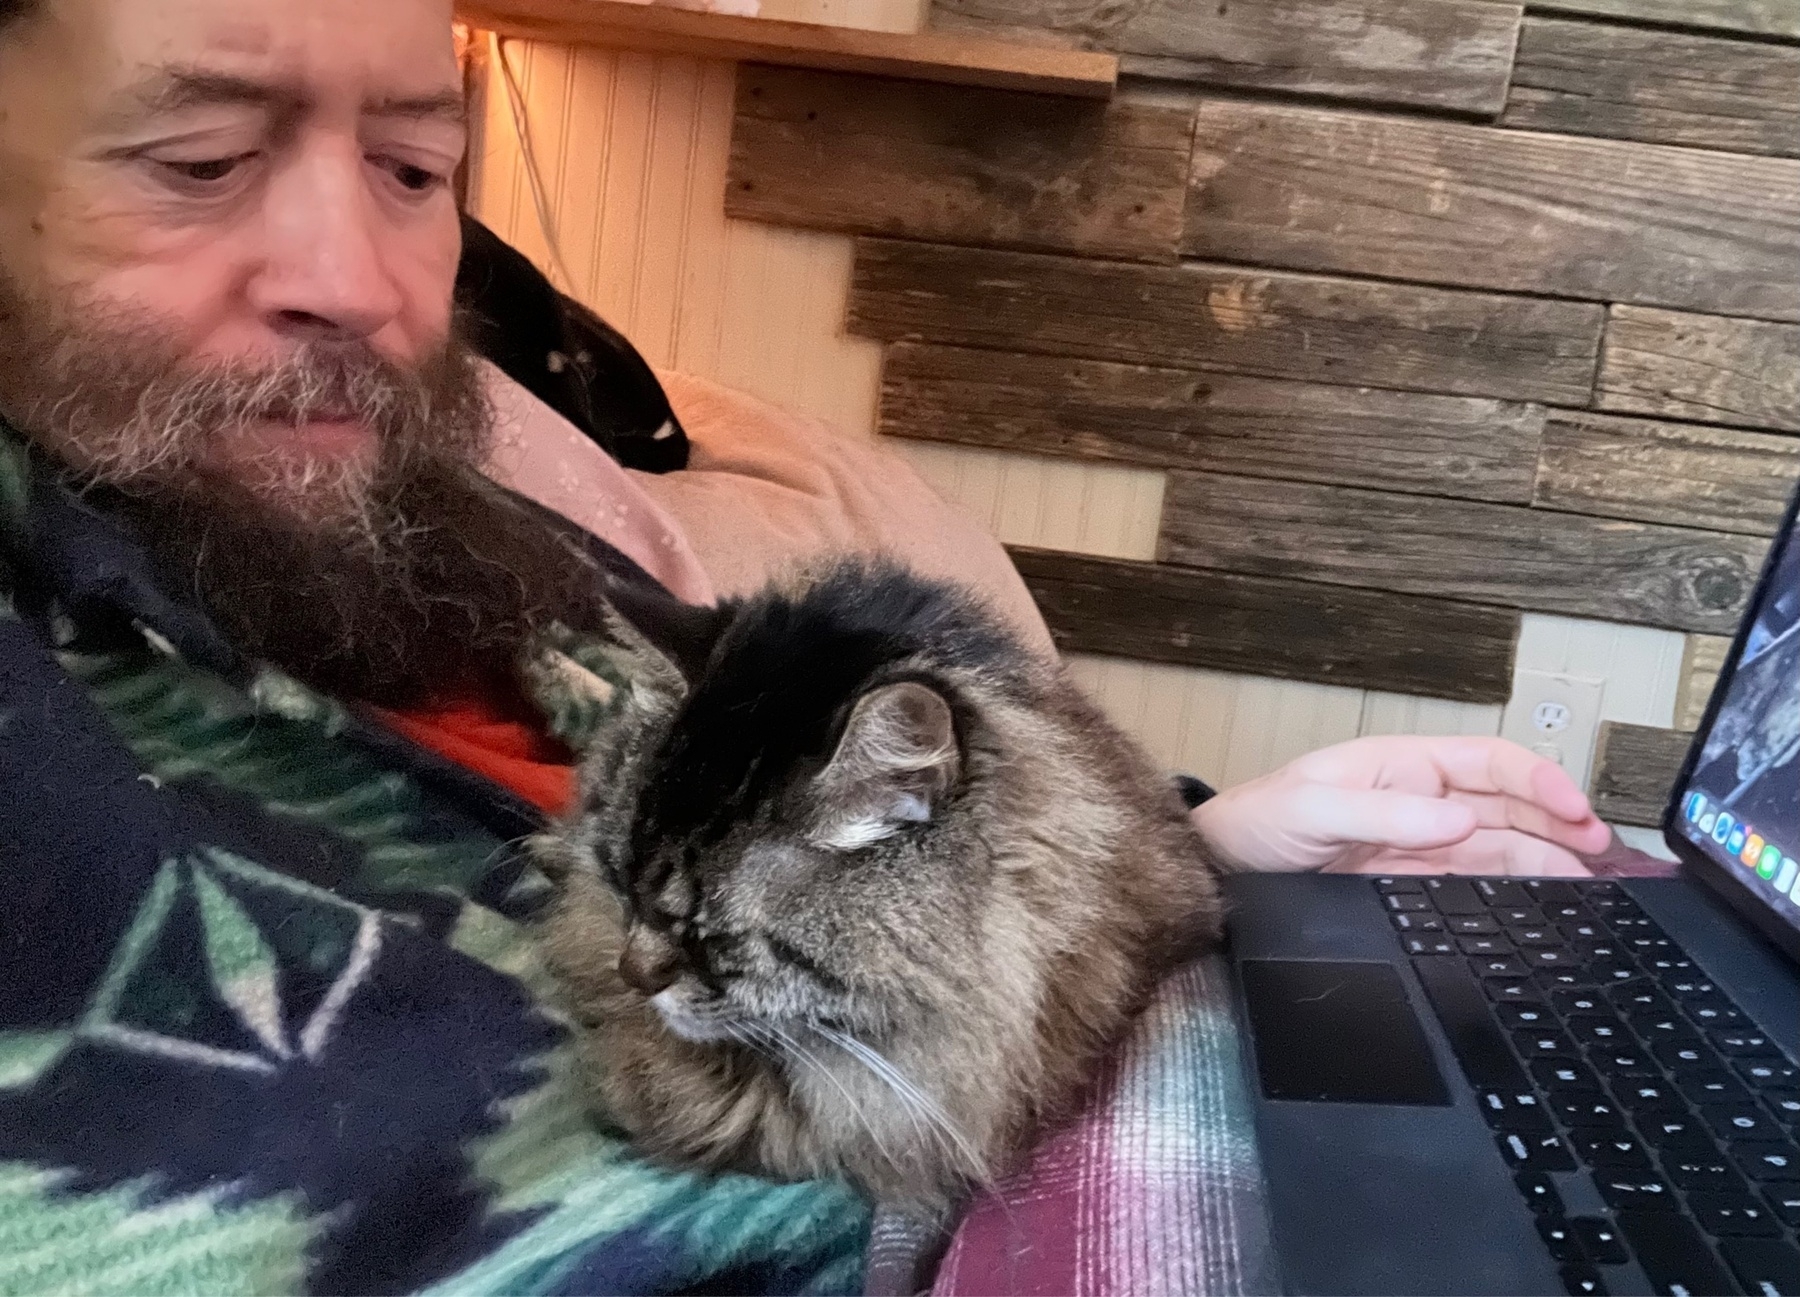 A guy with a beard is looking at a brown cat that has placed herself comfortably between him and his iPad keyboard. 